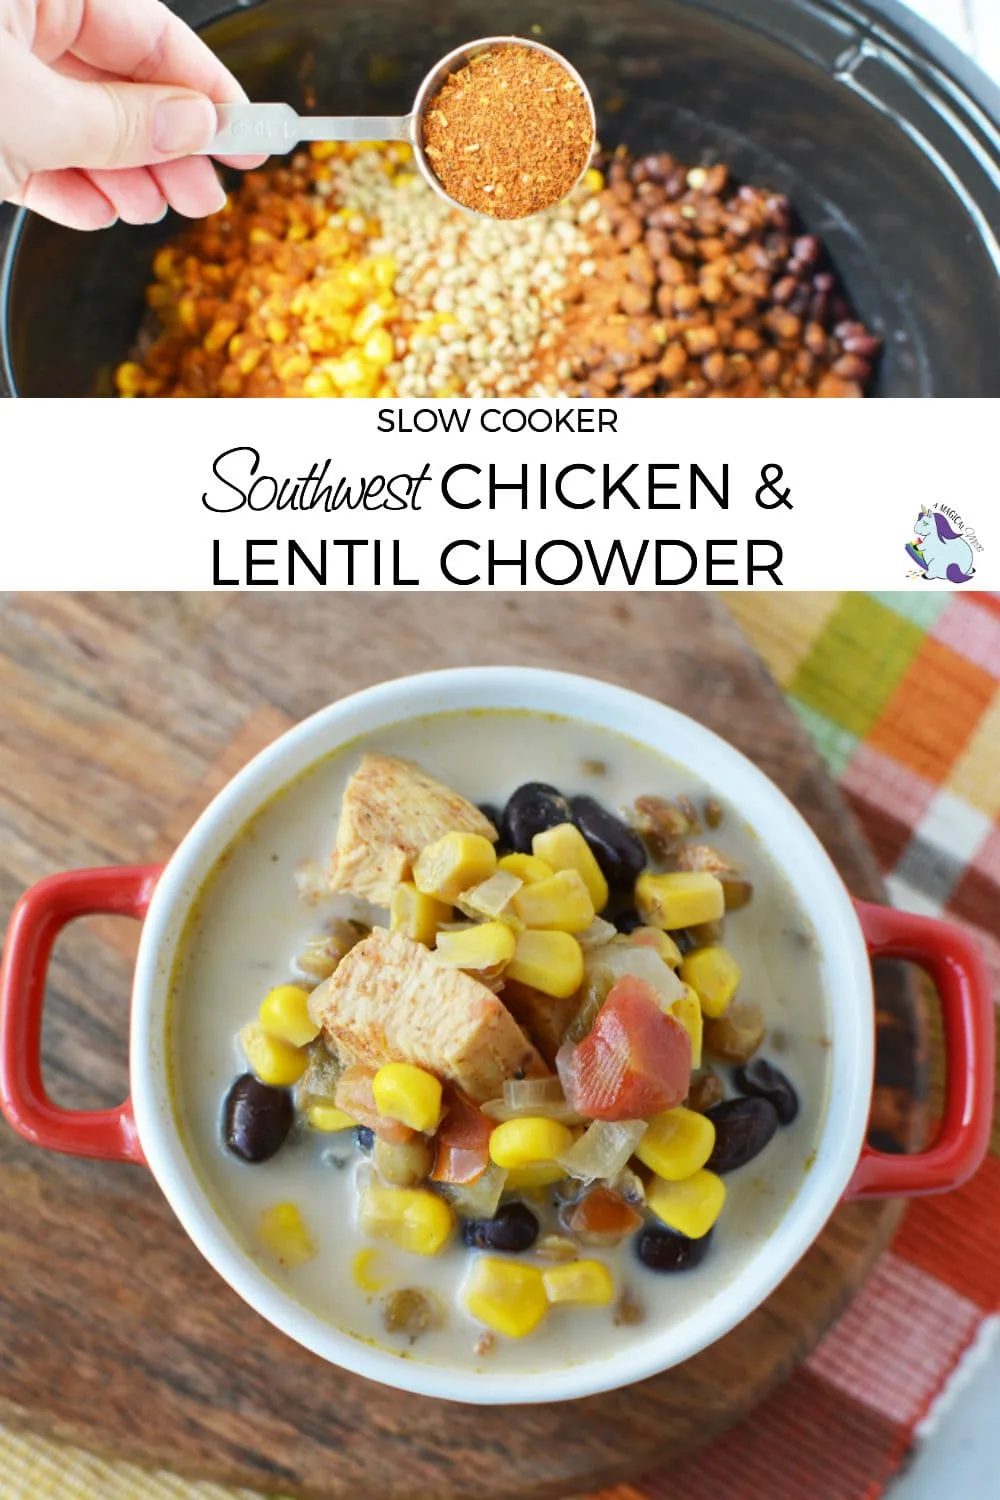 Crowd Pleasing Slow Cooker Chowder Recipe